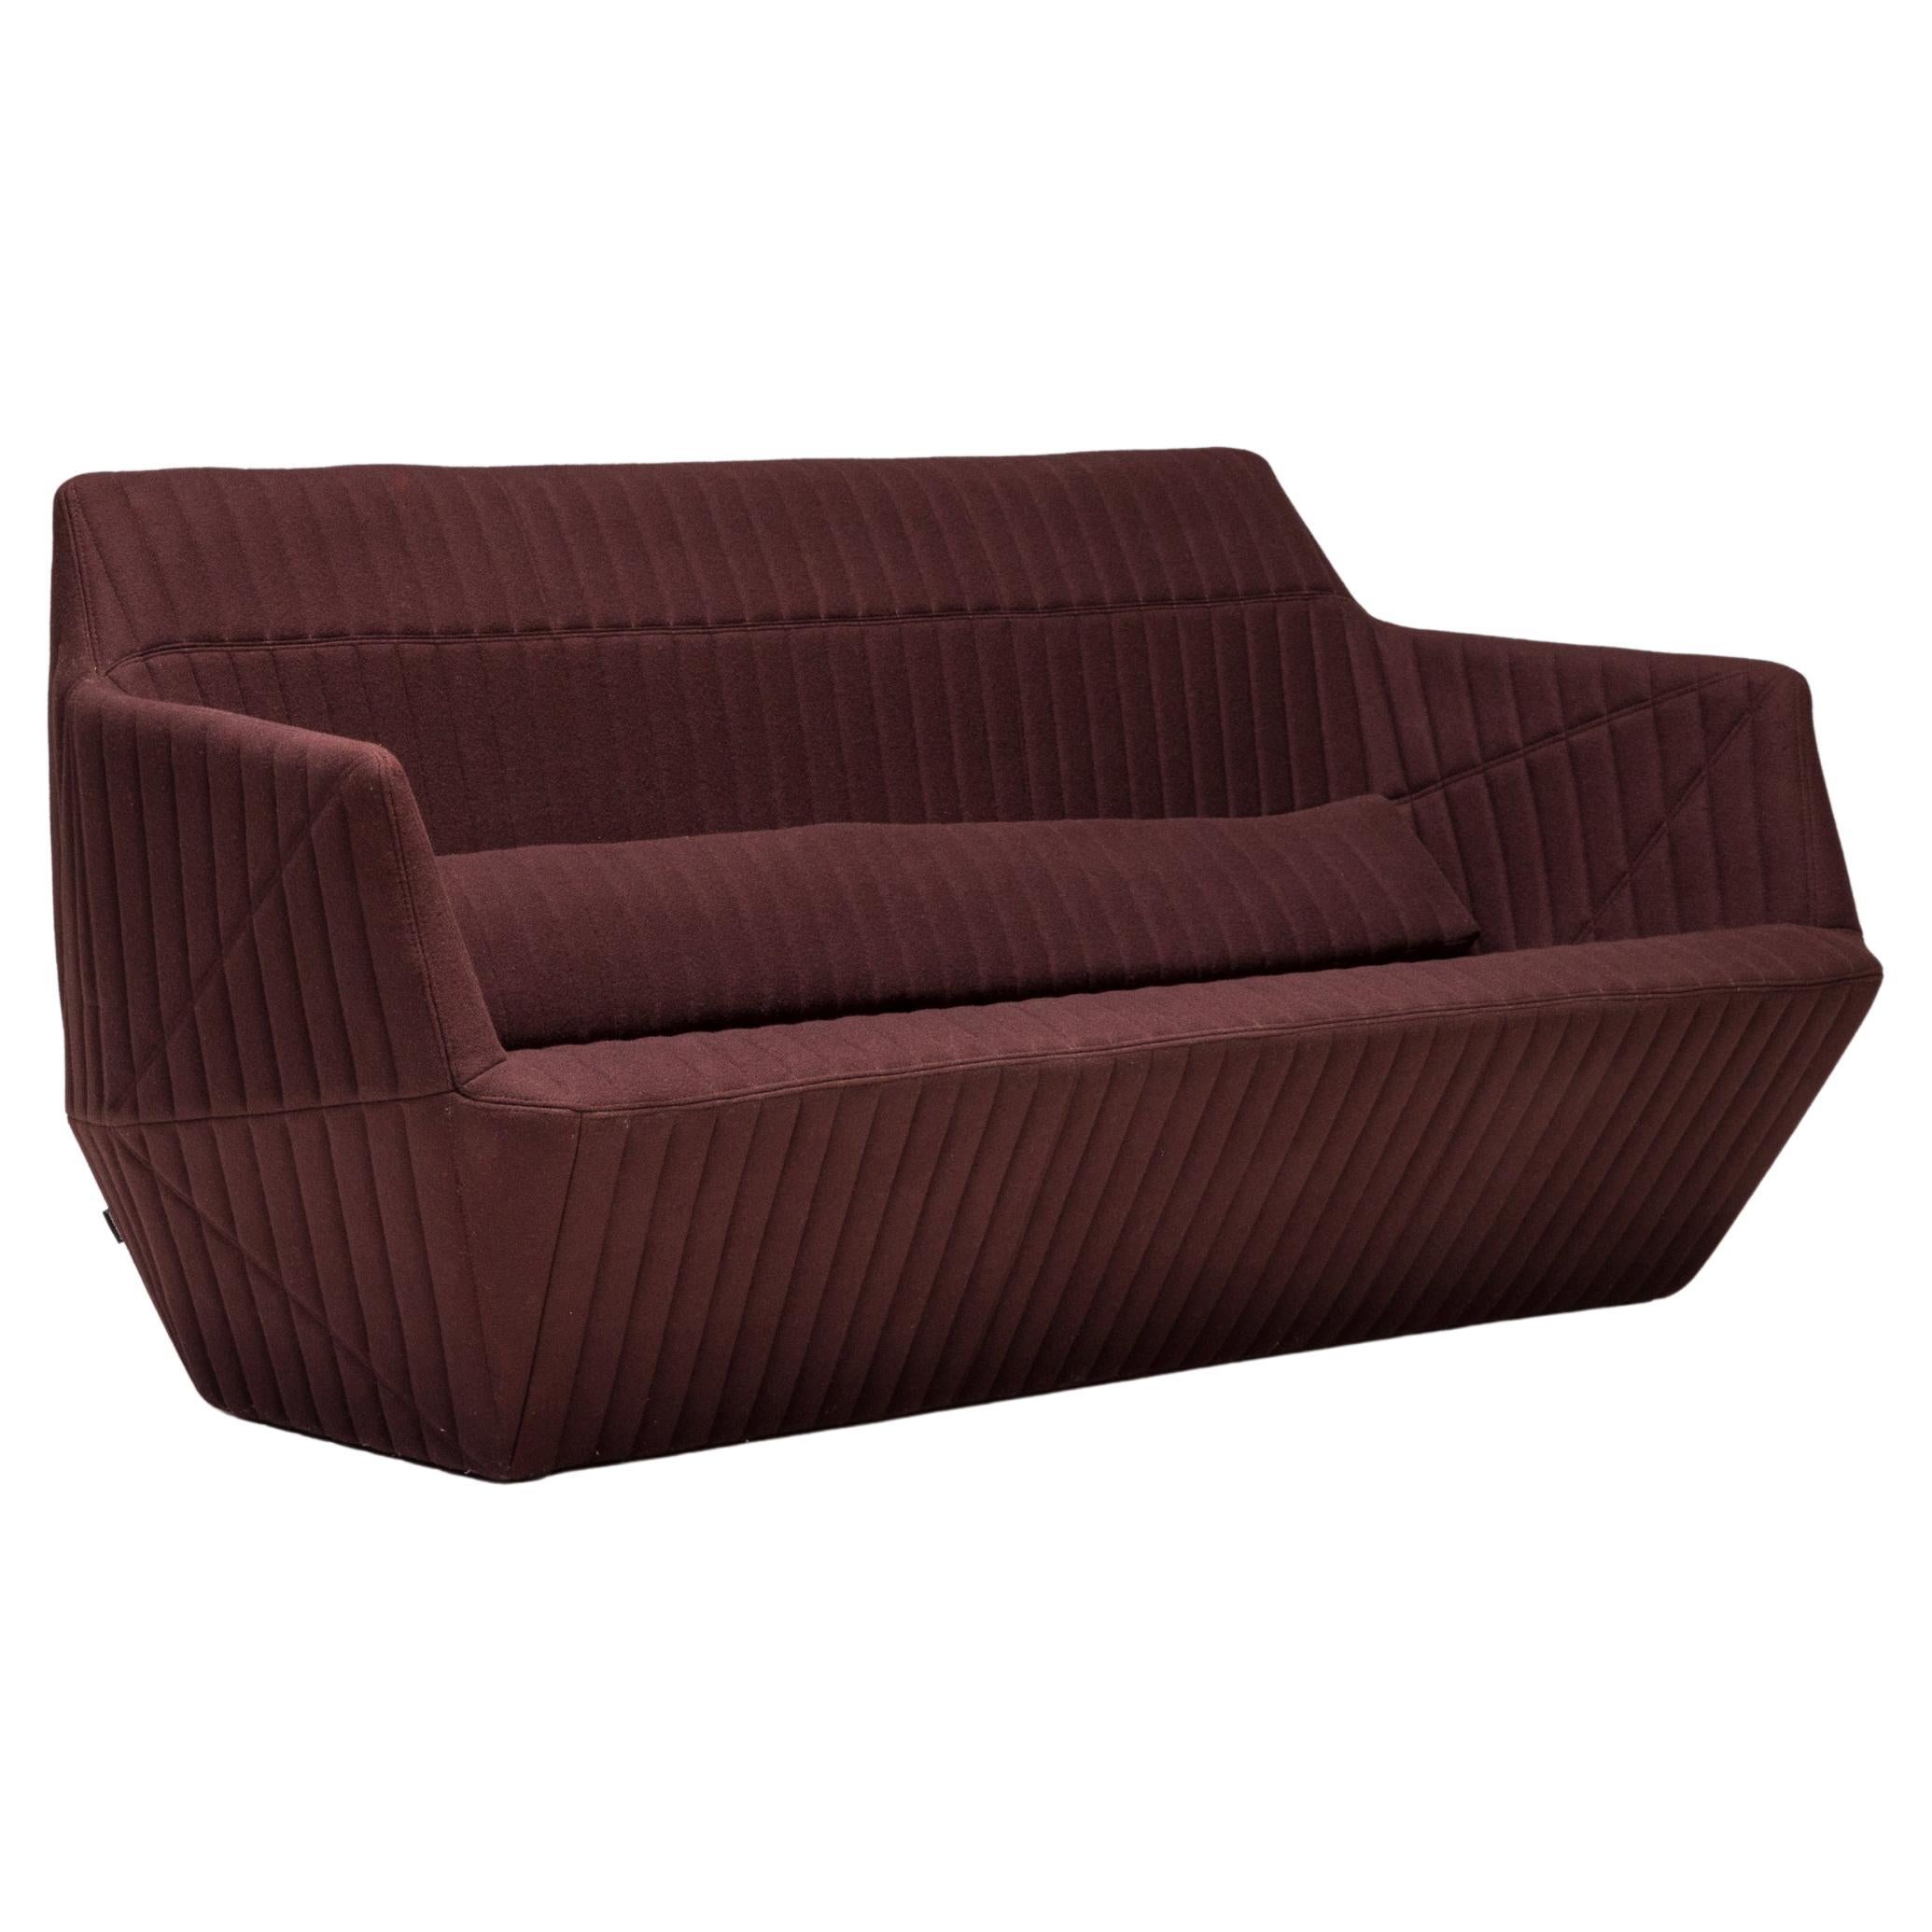 Ligne Roset by Ronan & Bouroullec Facett Brown Wool Faceted Sofa